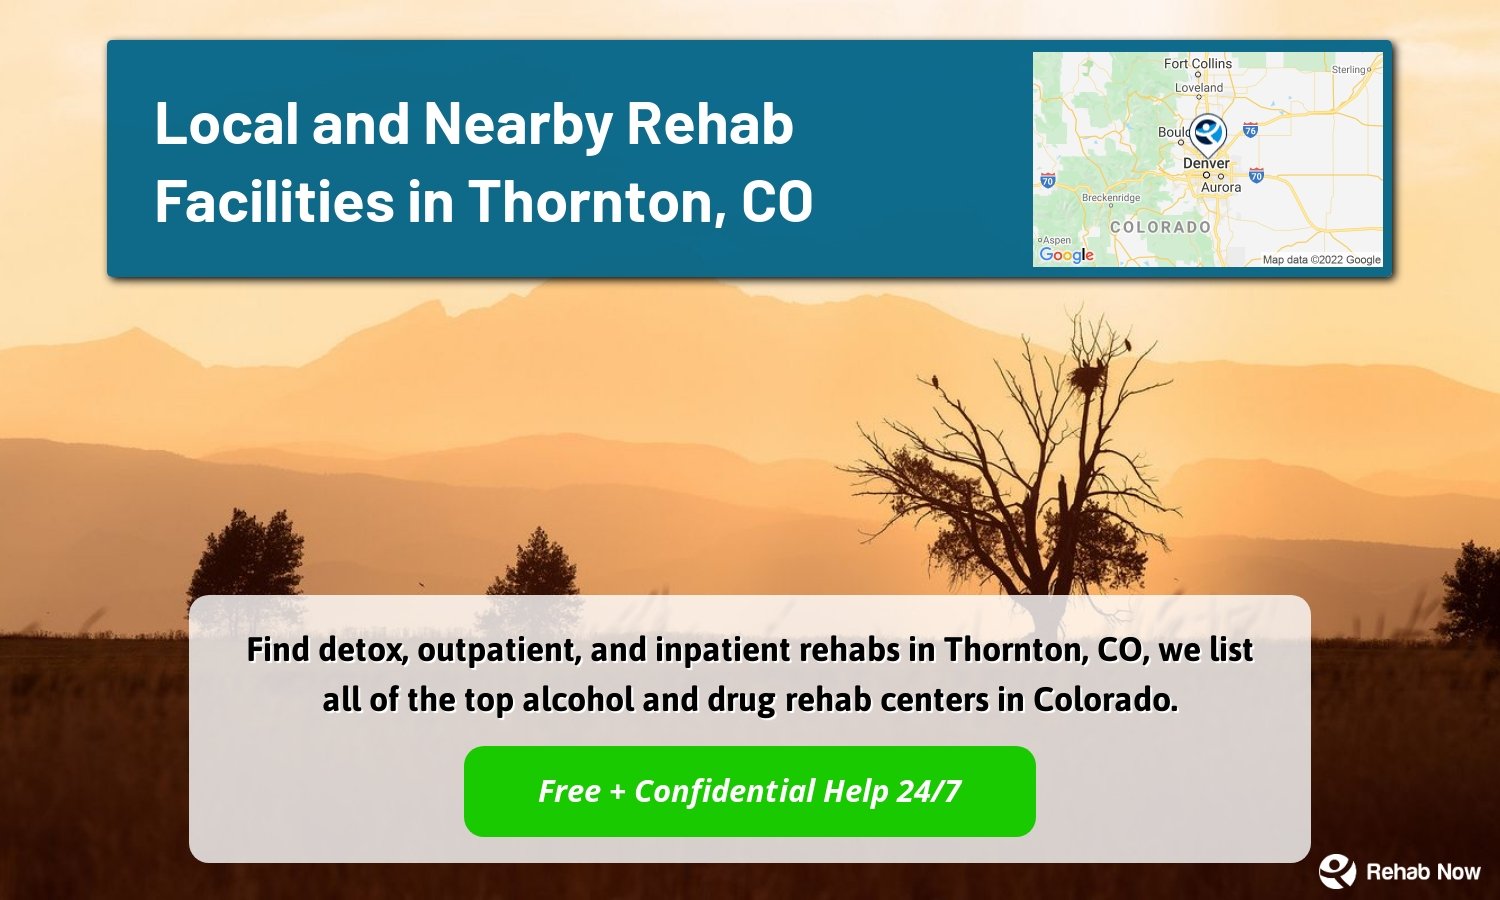 Find detox, outpatient, and inpatient rehabs in Thornton, CO, we list all of the top alcohol and drug rehab centers in Colorado.